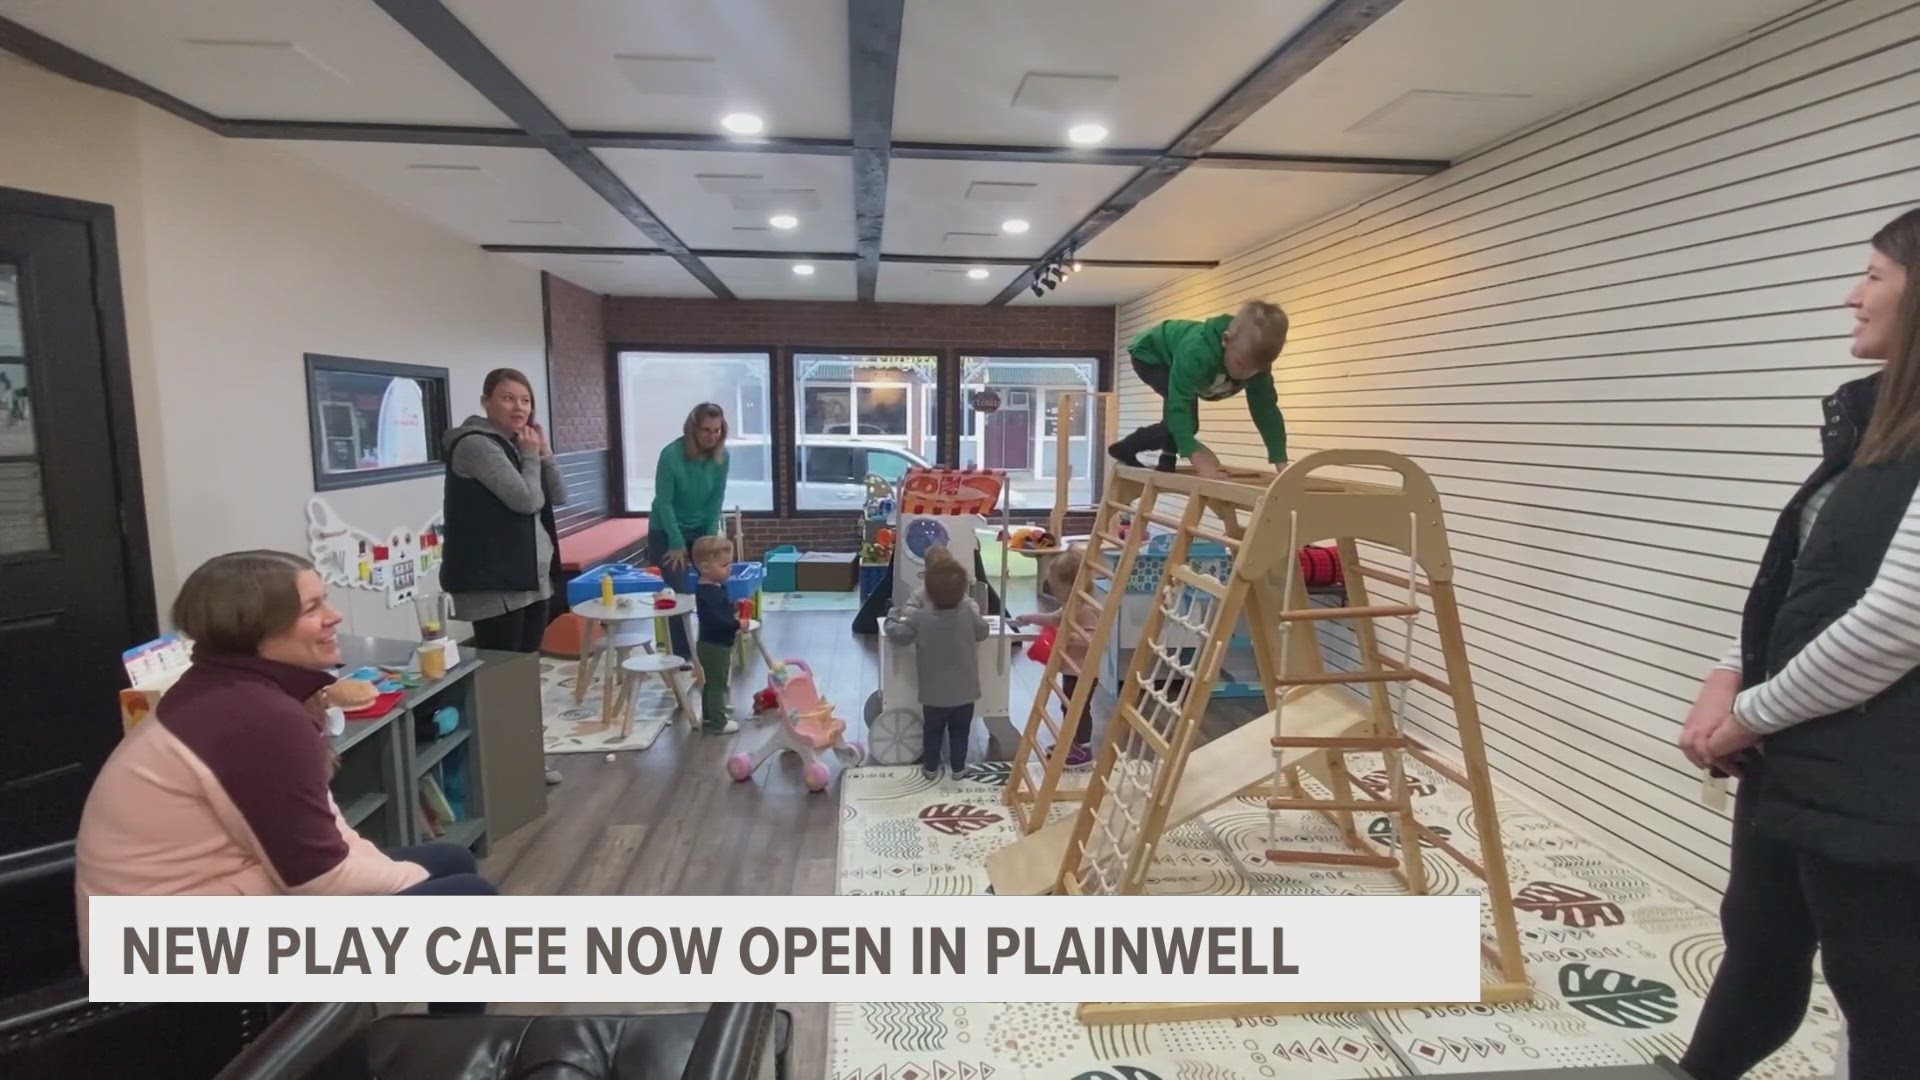 Play cafés are popping up all across West Michigan and the newest one is now open in Allegan County.